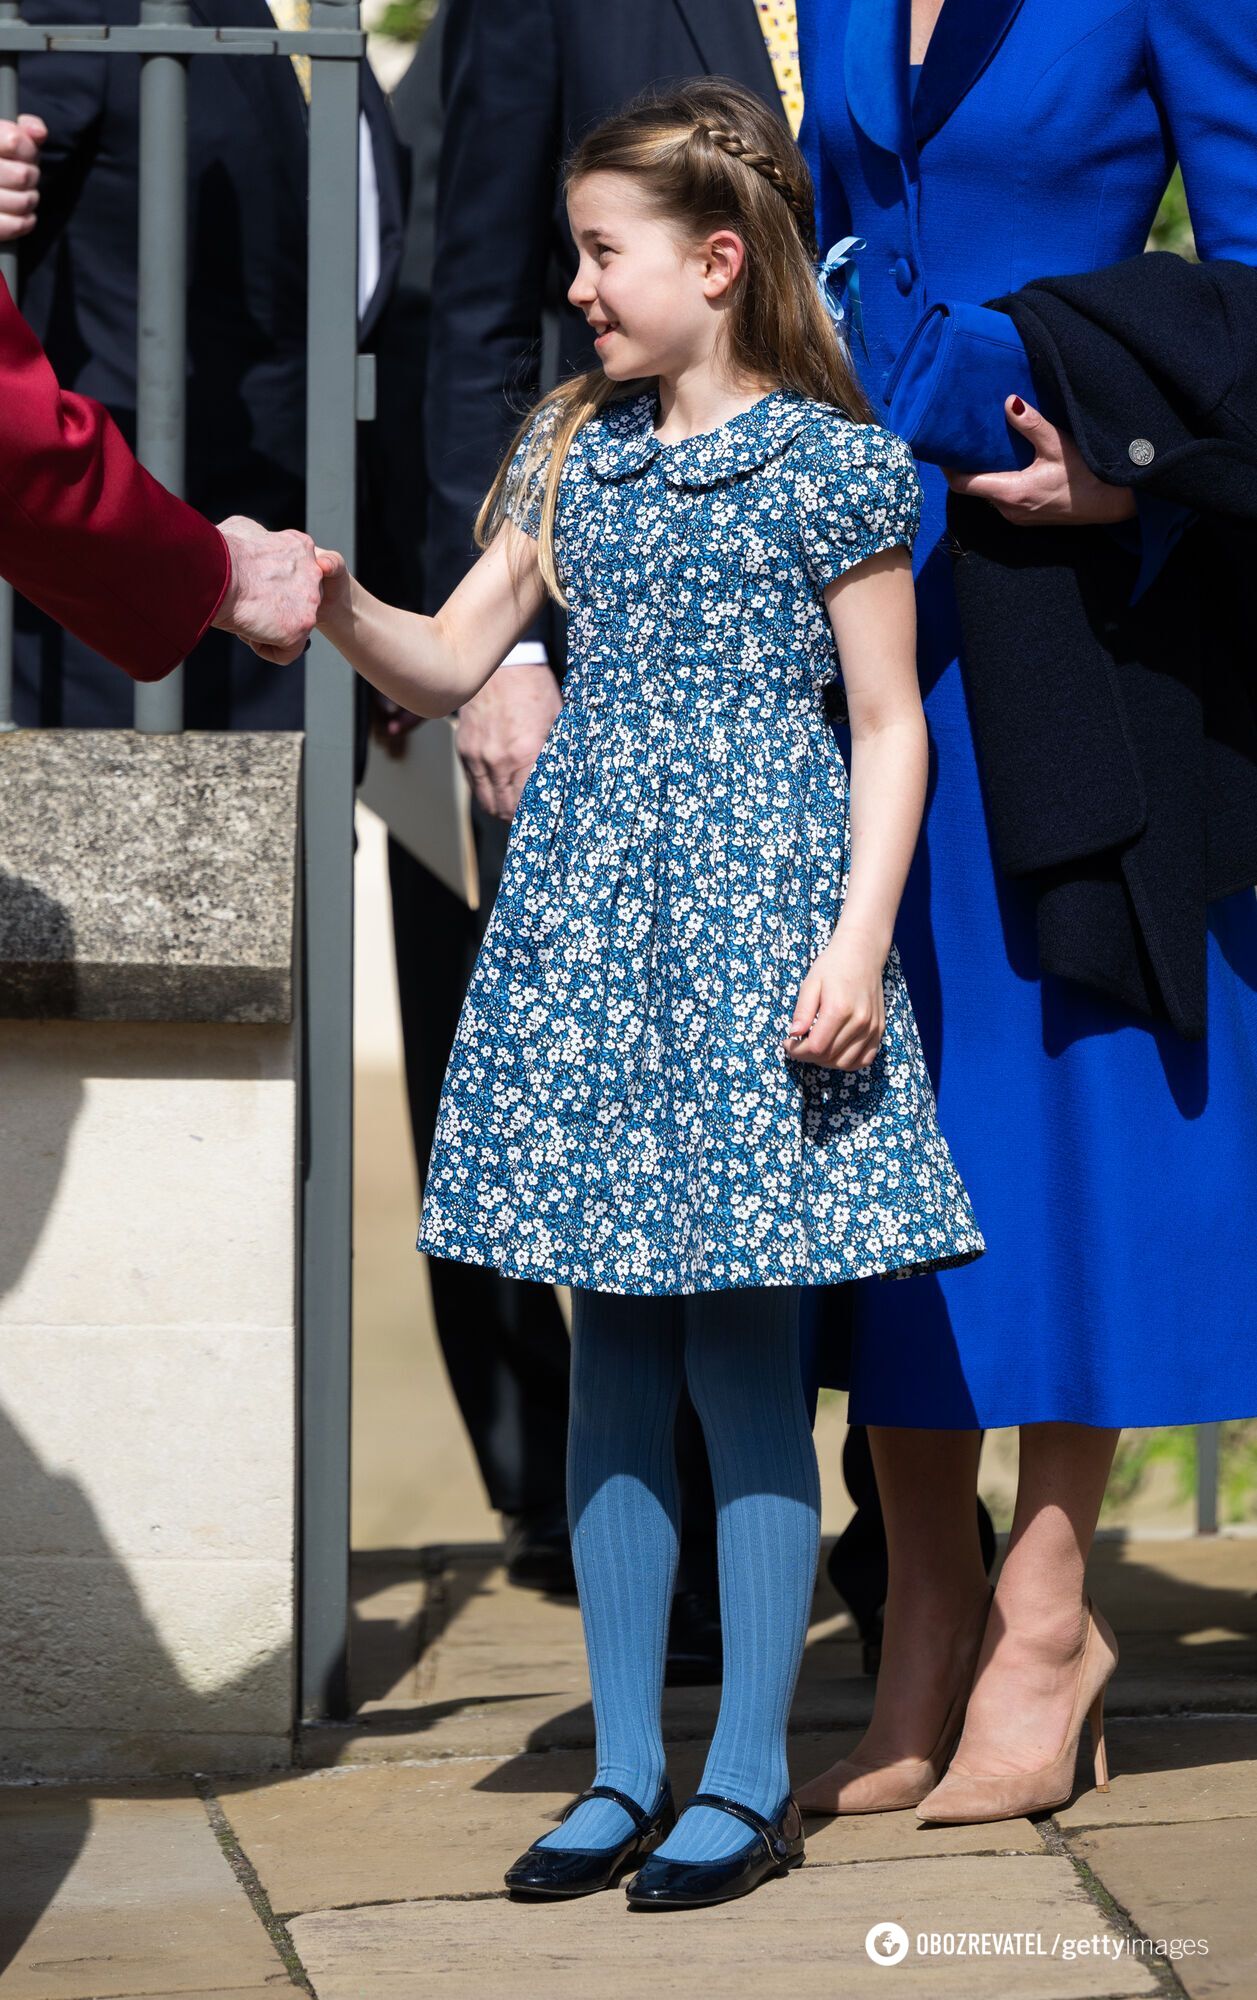 Princess Charlotte is one of the best dressed children on the planet. 10 photos to prove it